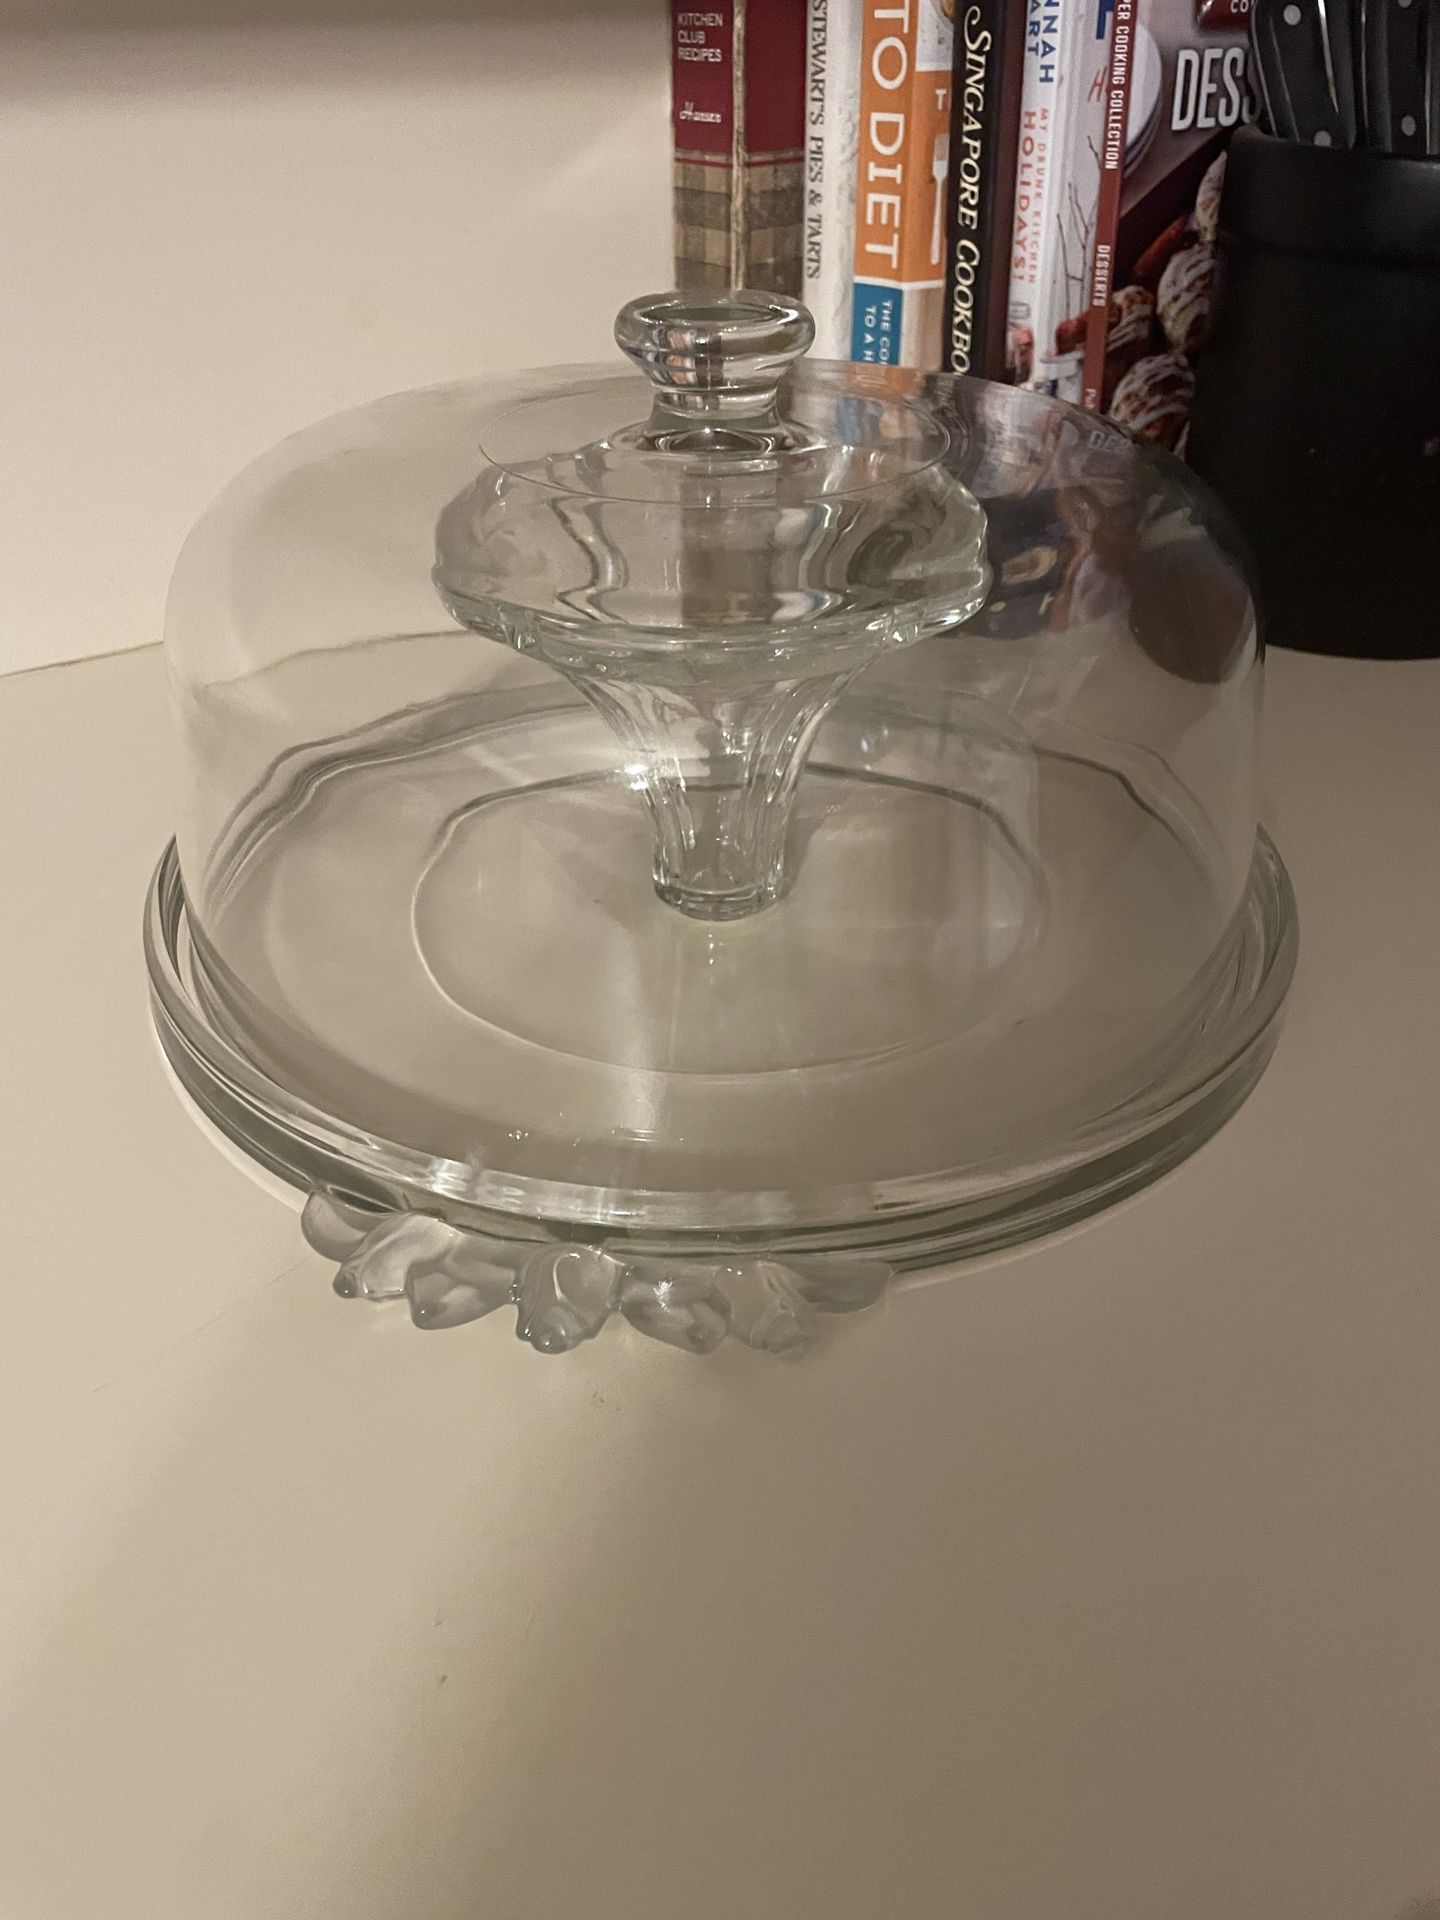 Pastries / Cake Display Serving Dish 4 Different Ways To Use. Multiple Purposes.